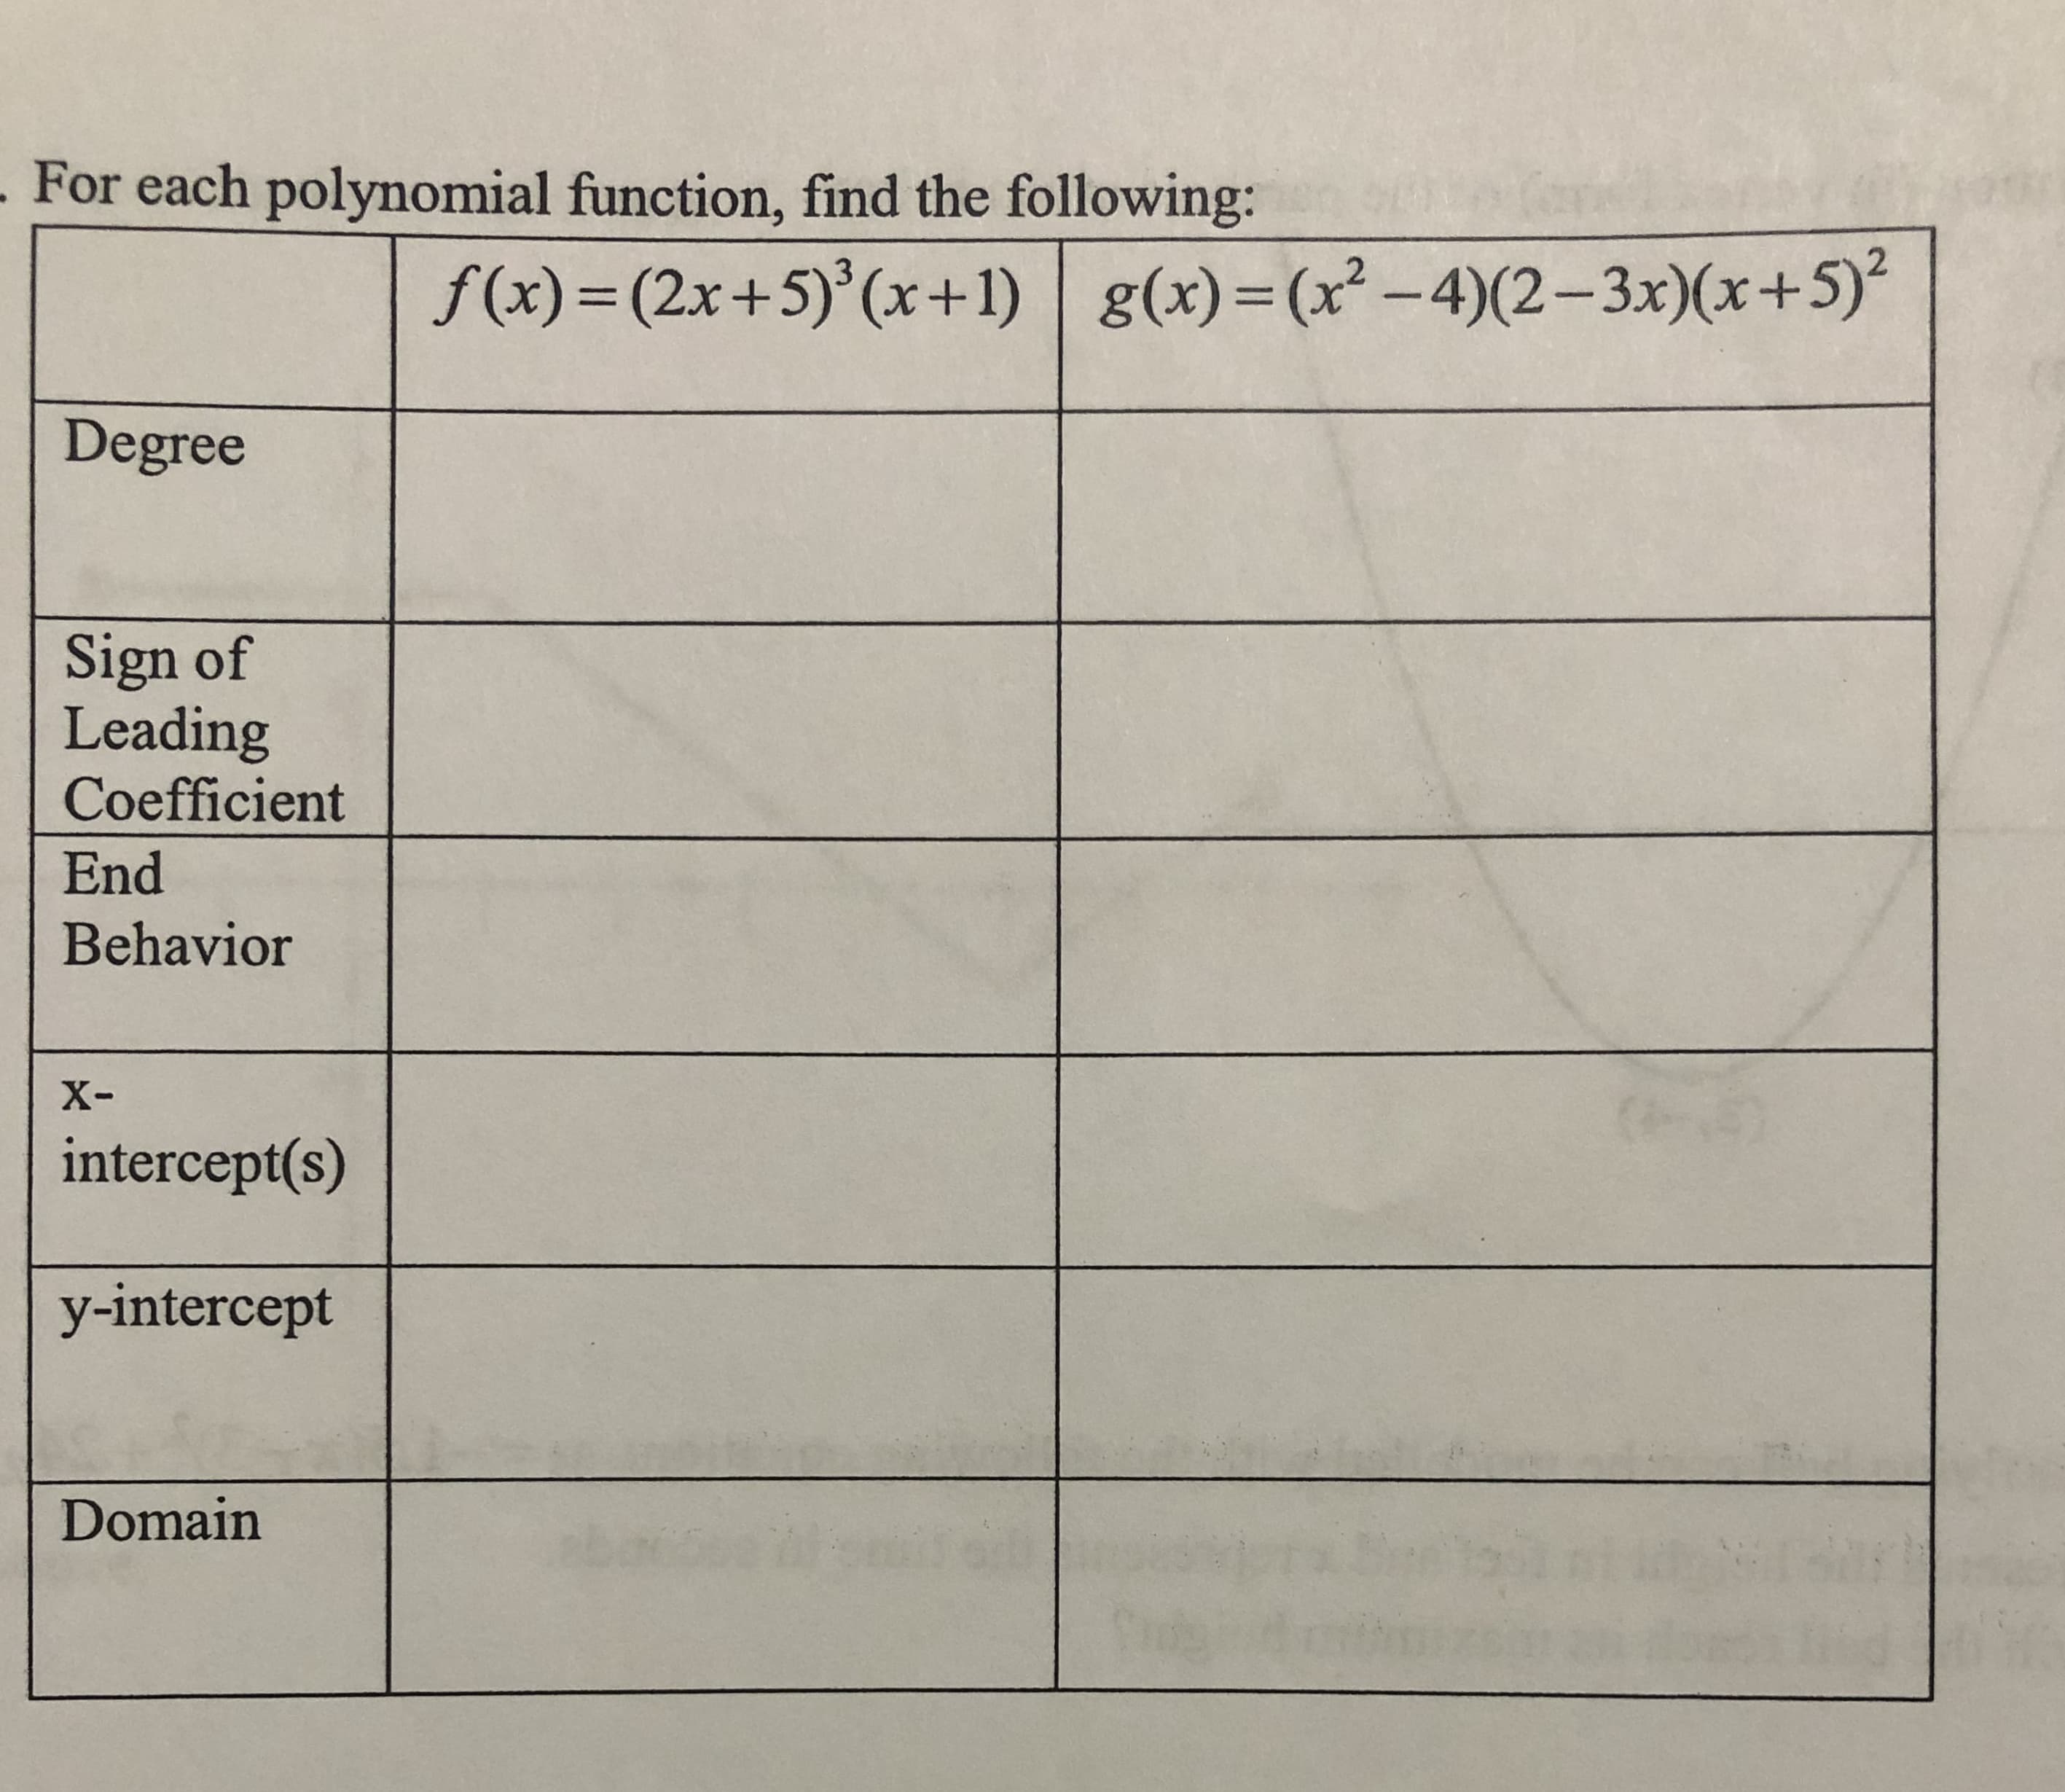 For each polynomial function, find the following:
g(x)=(x² –4)(2-3x)(x+5)²
f(x) = (2x+5)°(x+1)
Degree
Sign of
Leading
Coefficient
End
Behavior
X-
intercept(s)
y-intercept
Domain
